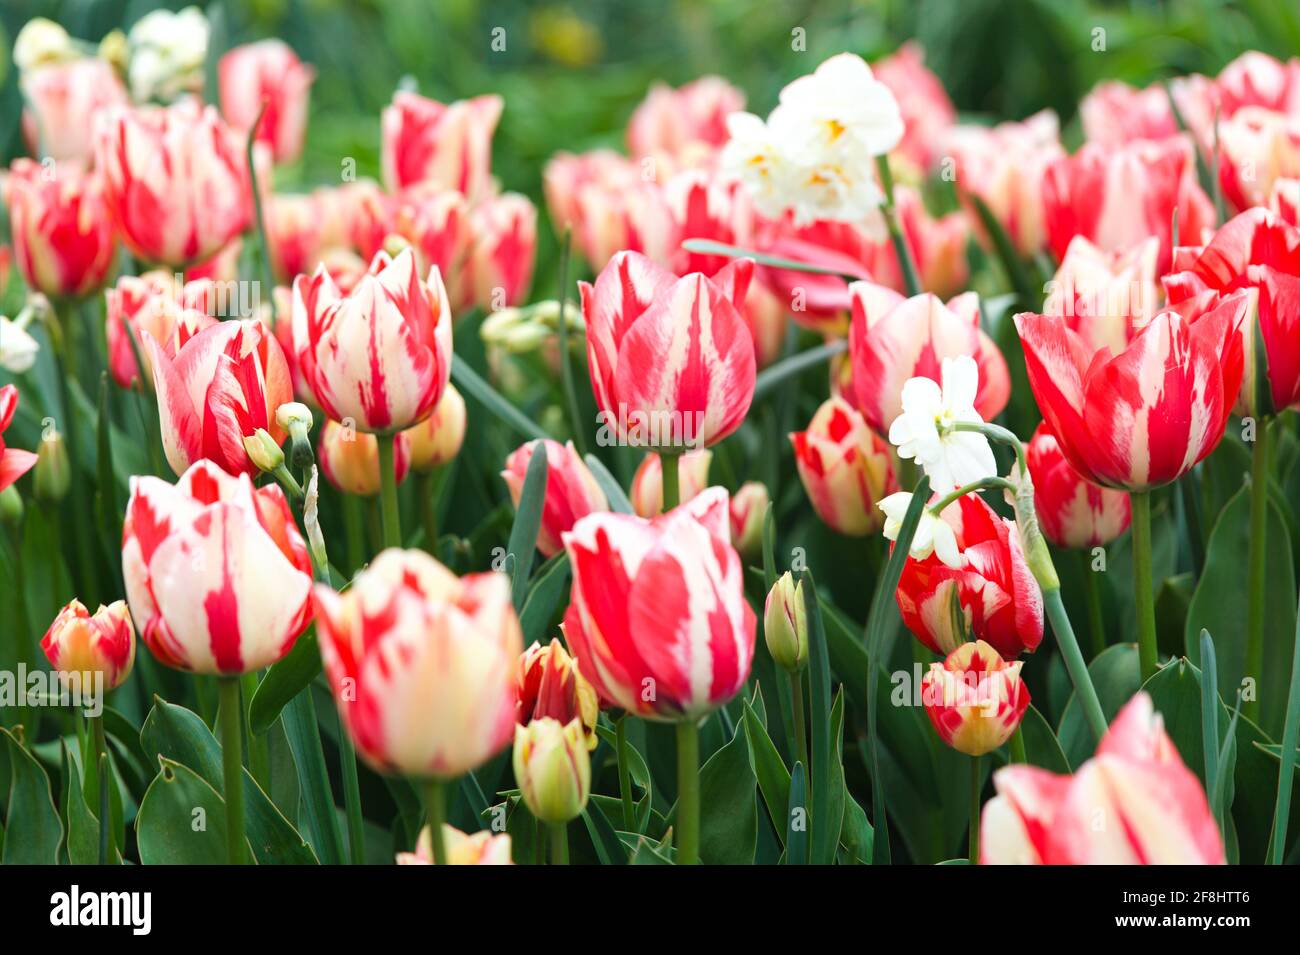 View of a Spring Garden - Flashes of red and creamy-white, striped blooms of 'Spryng Break' tulips, adorn flowerbeds in an Essex garden. Stock Photo